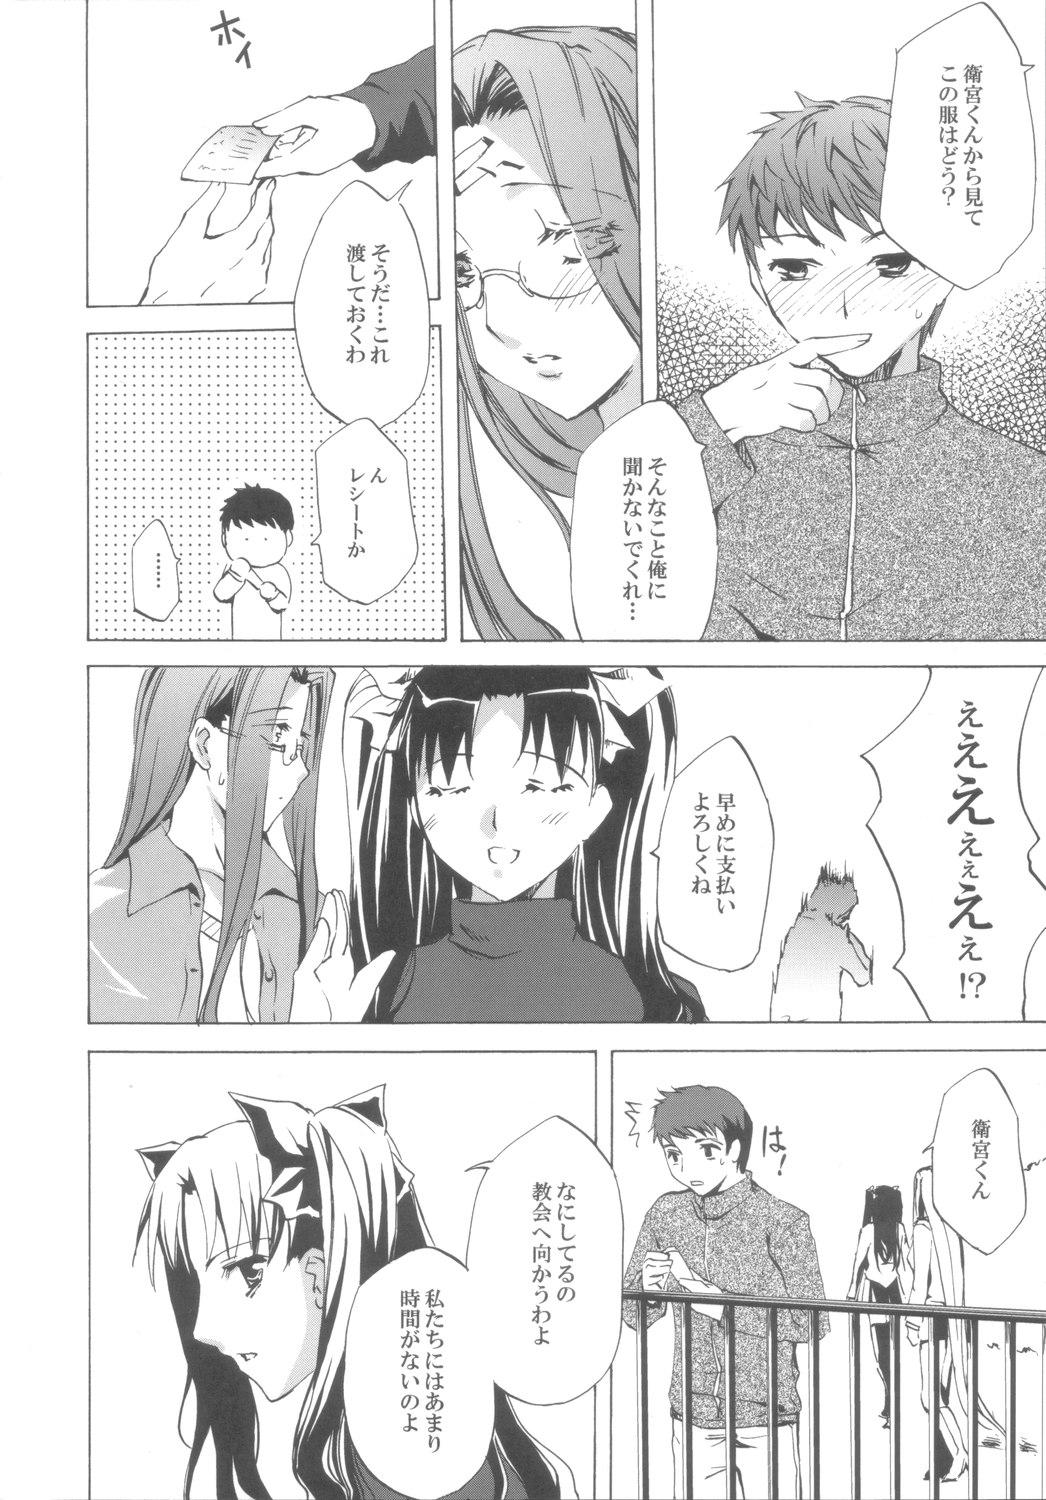 Twerk Face III stay memory so truth - Fate stay night Home - Page 9